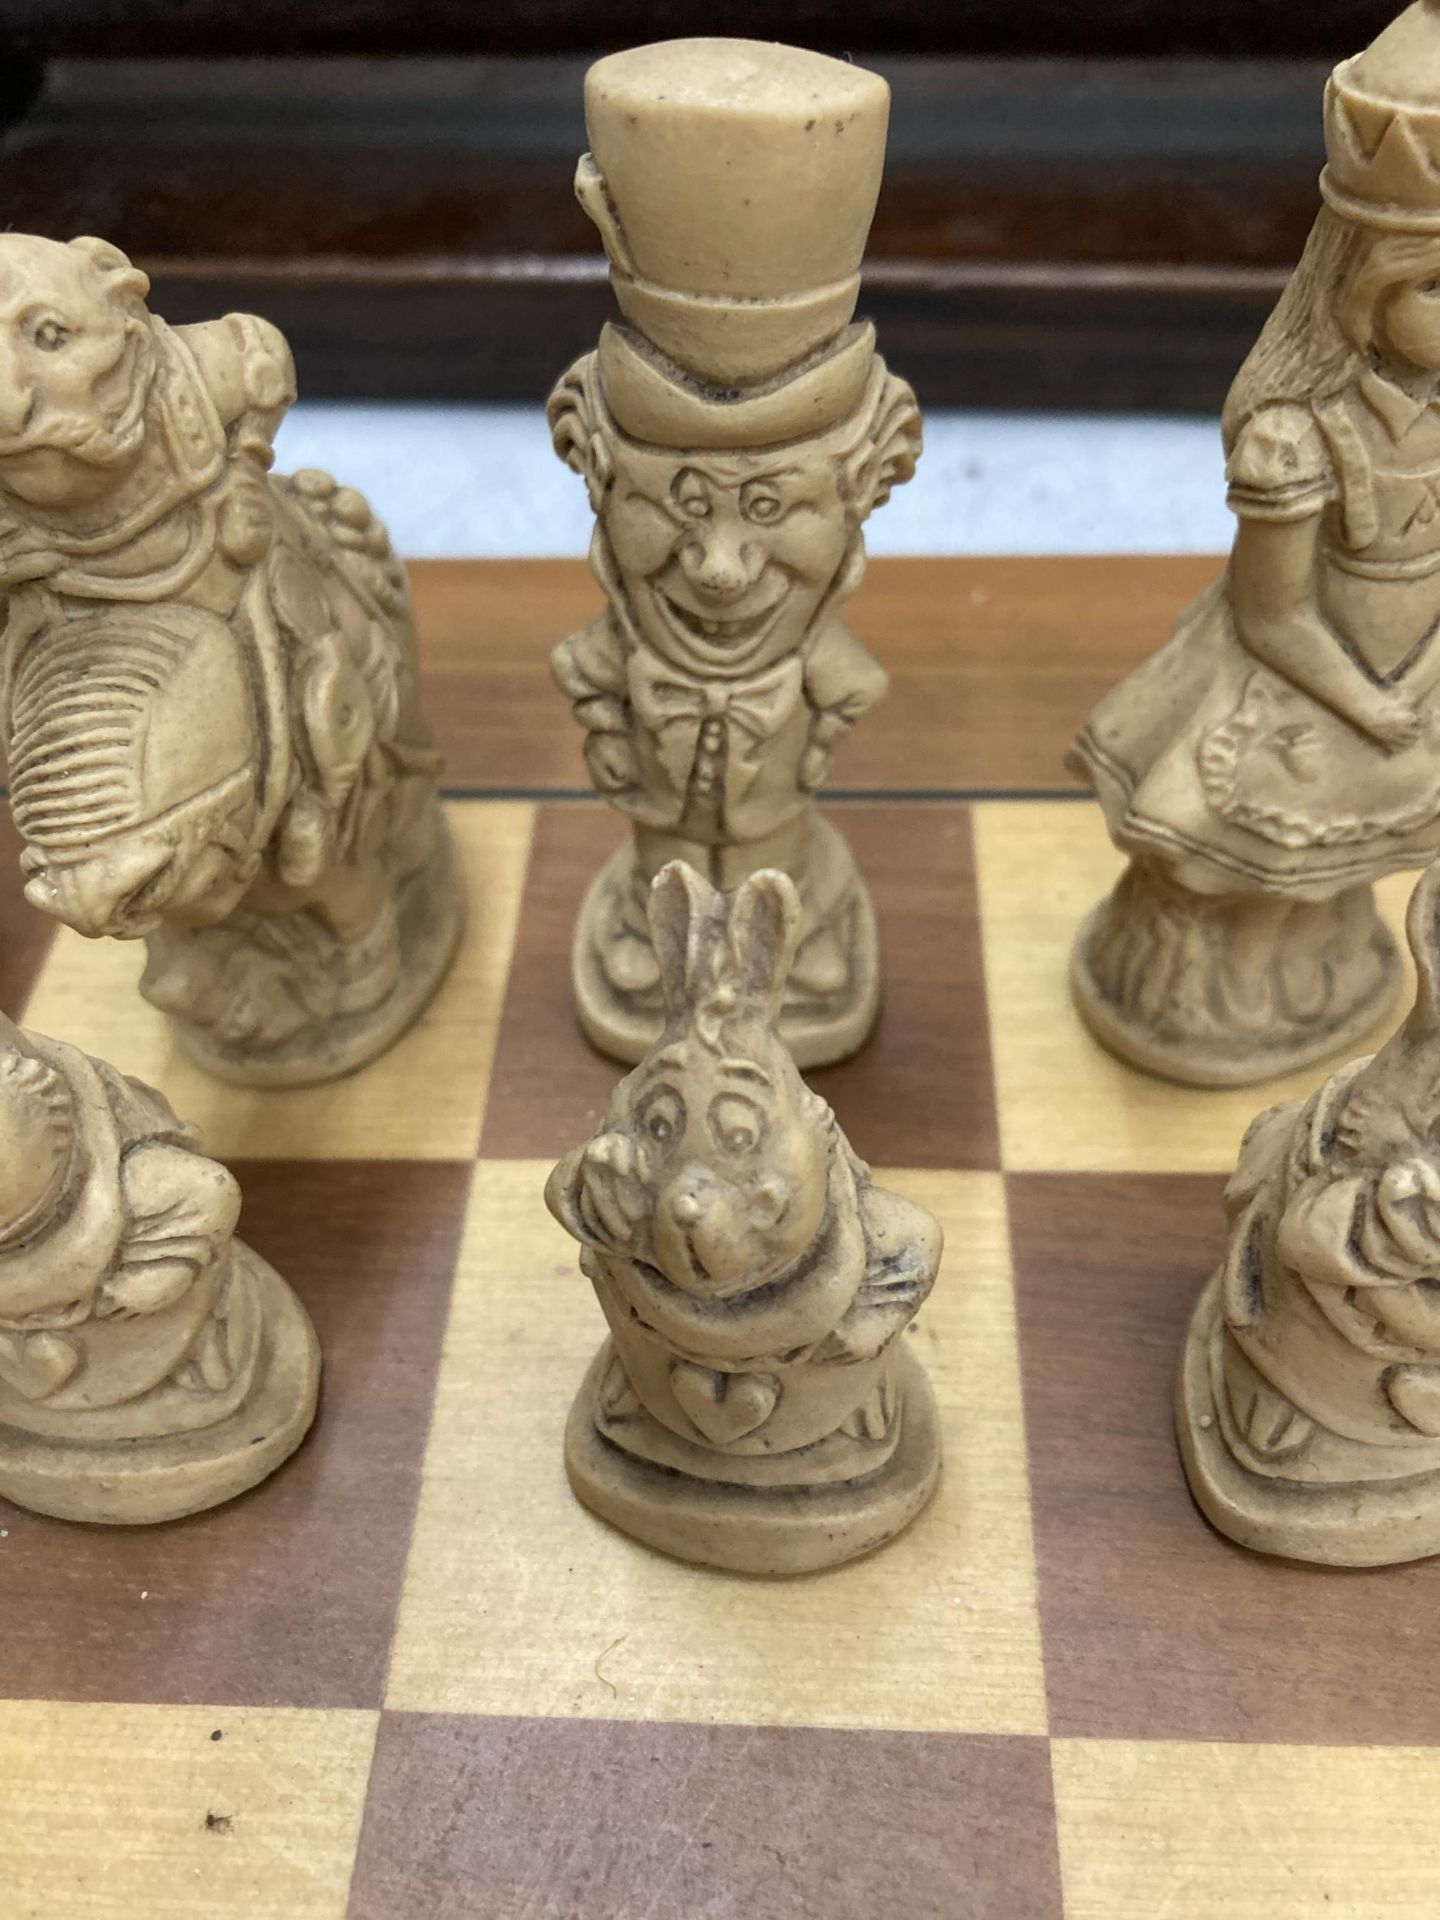 A CHESS SET WITH A WOODEN BOARD AND ALICE IN WONDERLAND THEMED PLAYING PIECES - Bild 3 aus 3